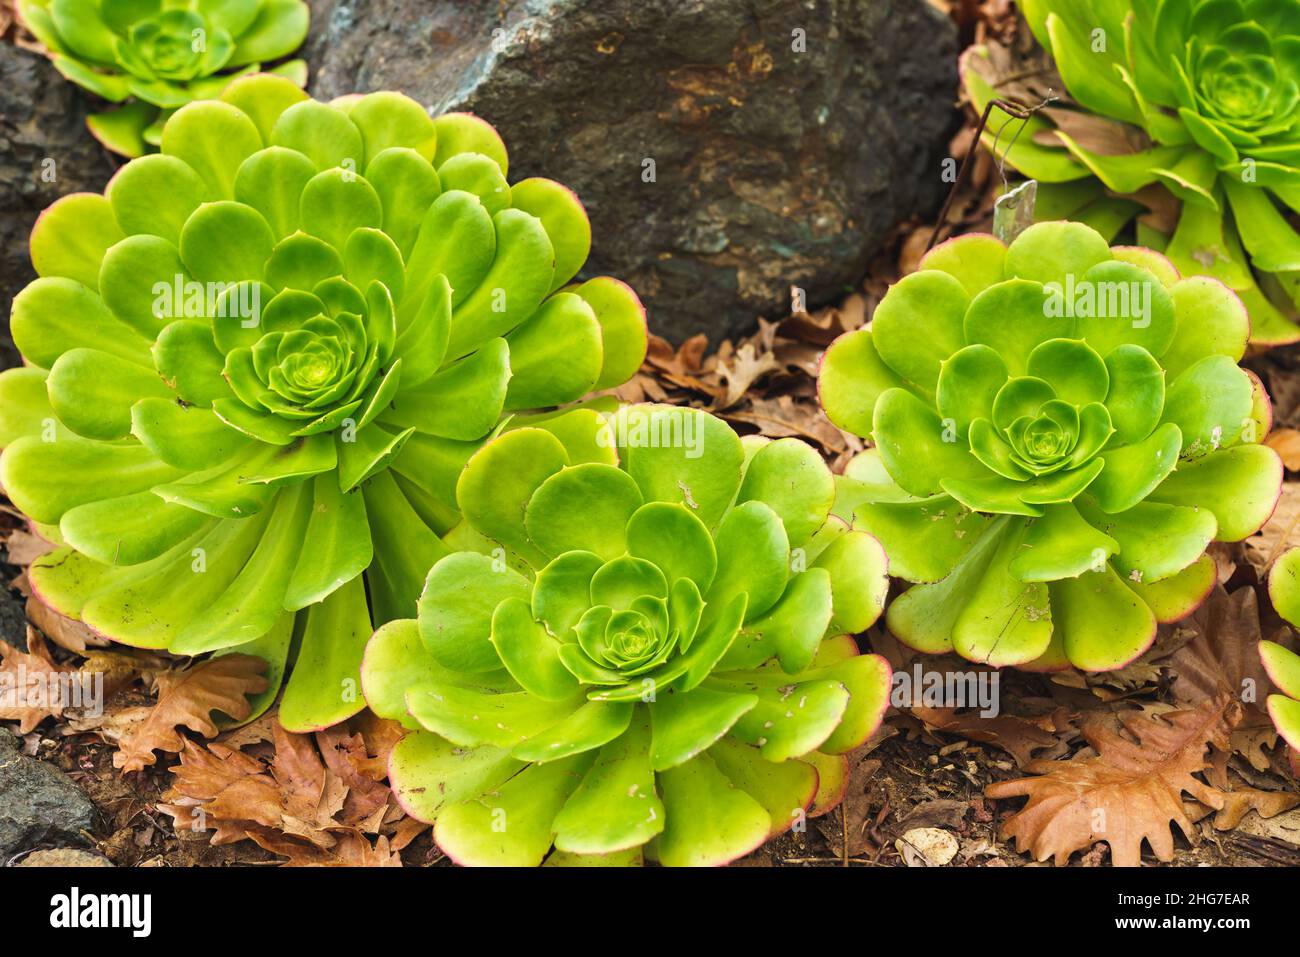 Aeonium Arboreum (Tree Aeonium) close up in the garden. Beautiful evergreen succulent plant with thick woody stems and large rosettes Stock Photo